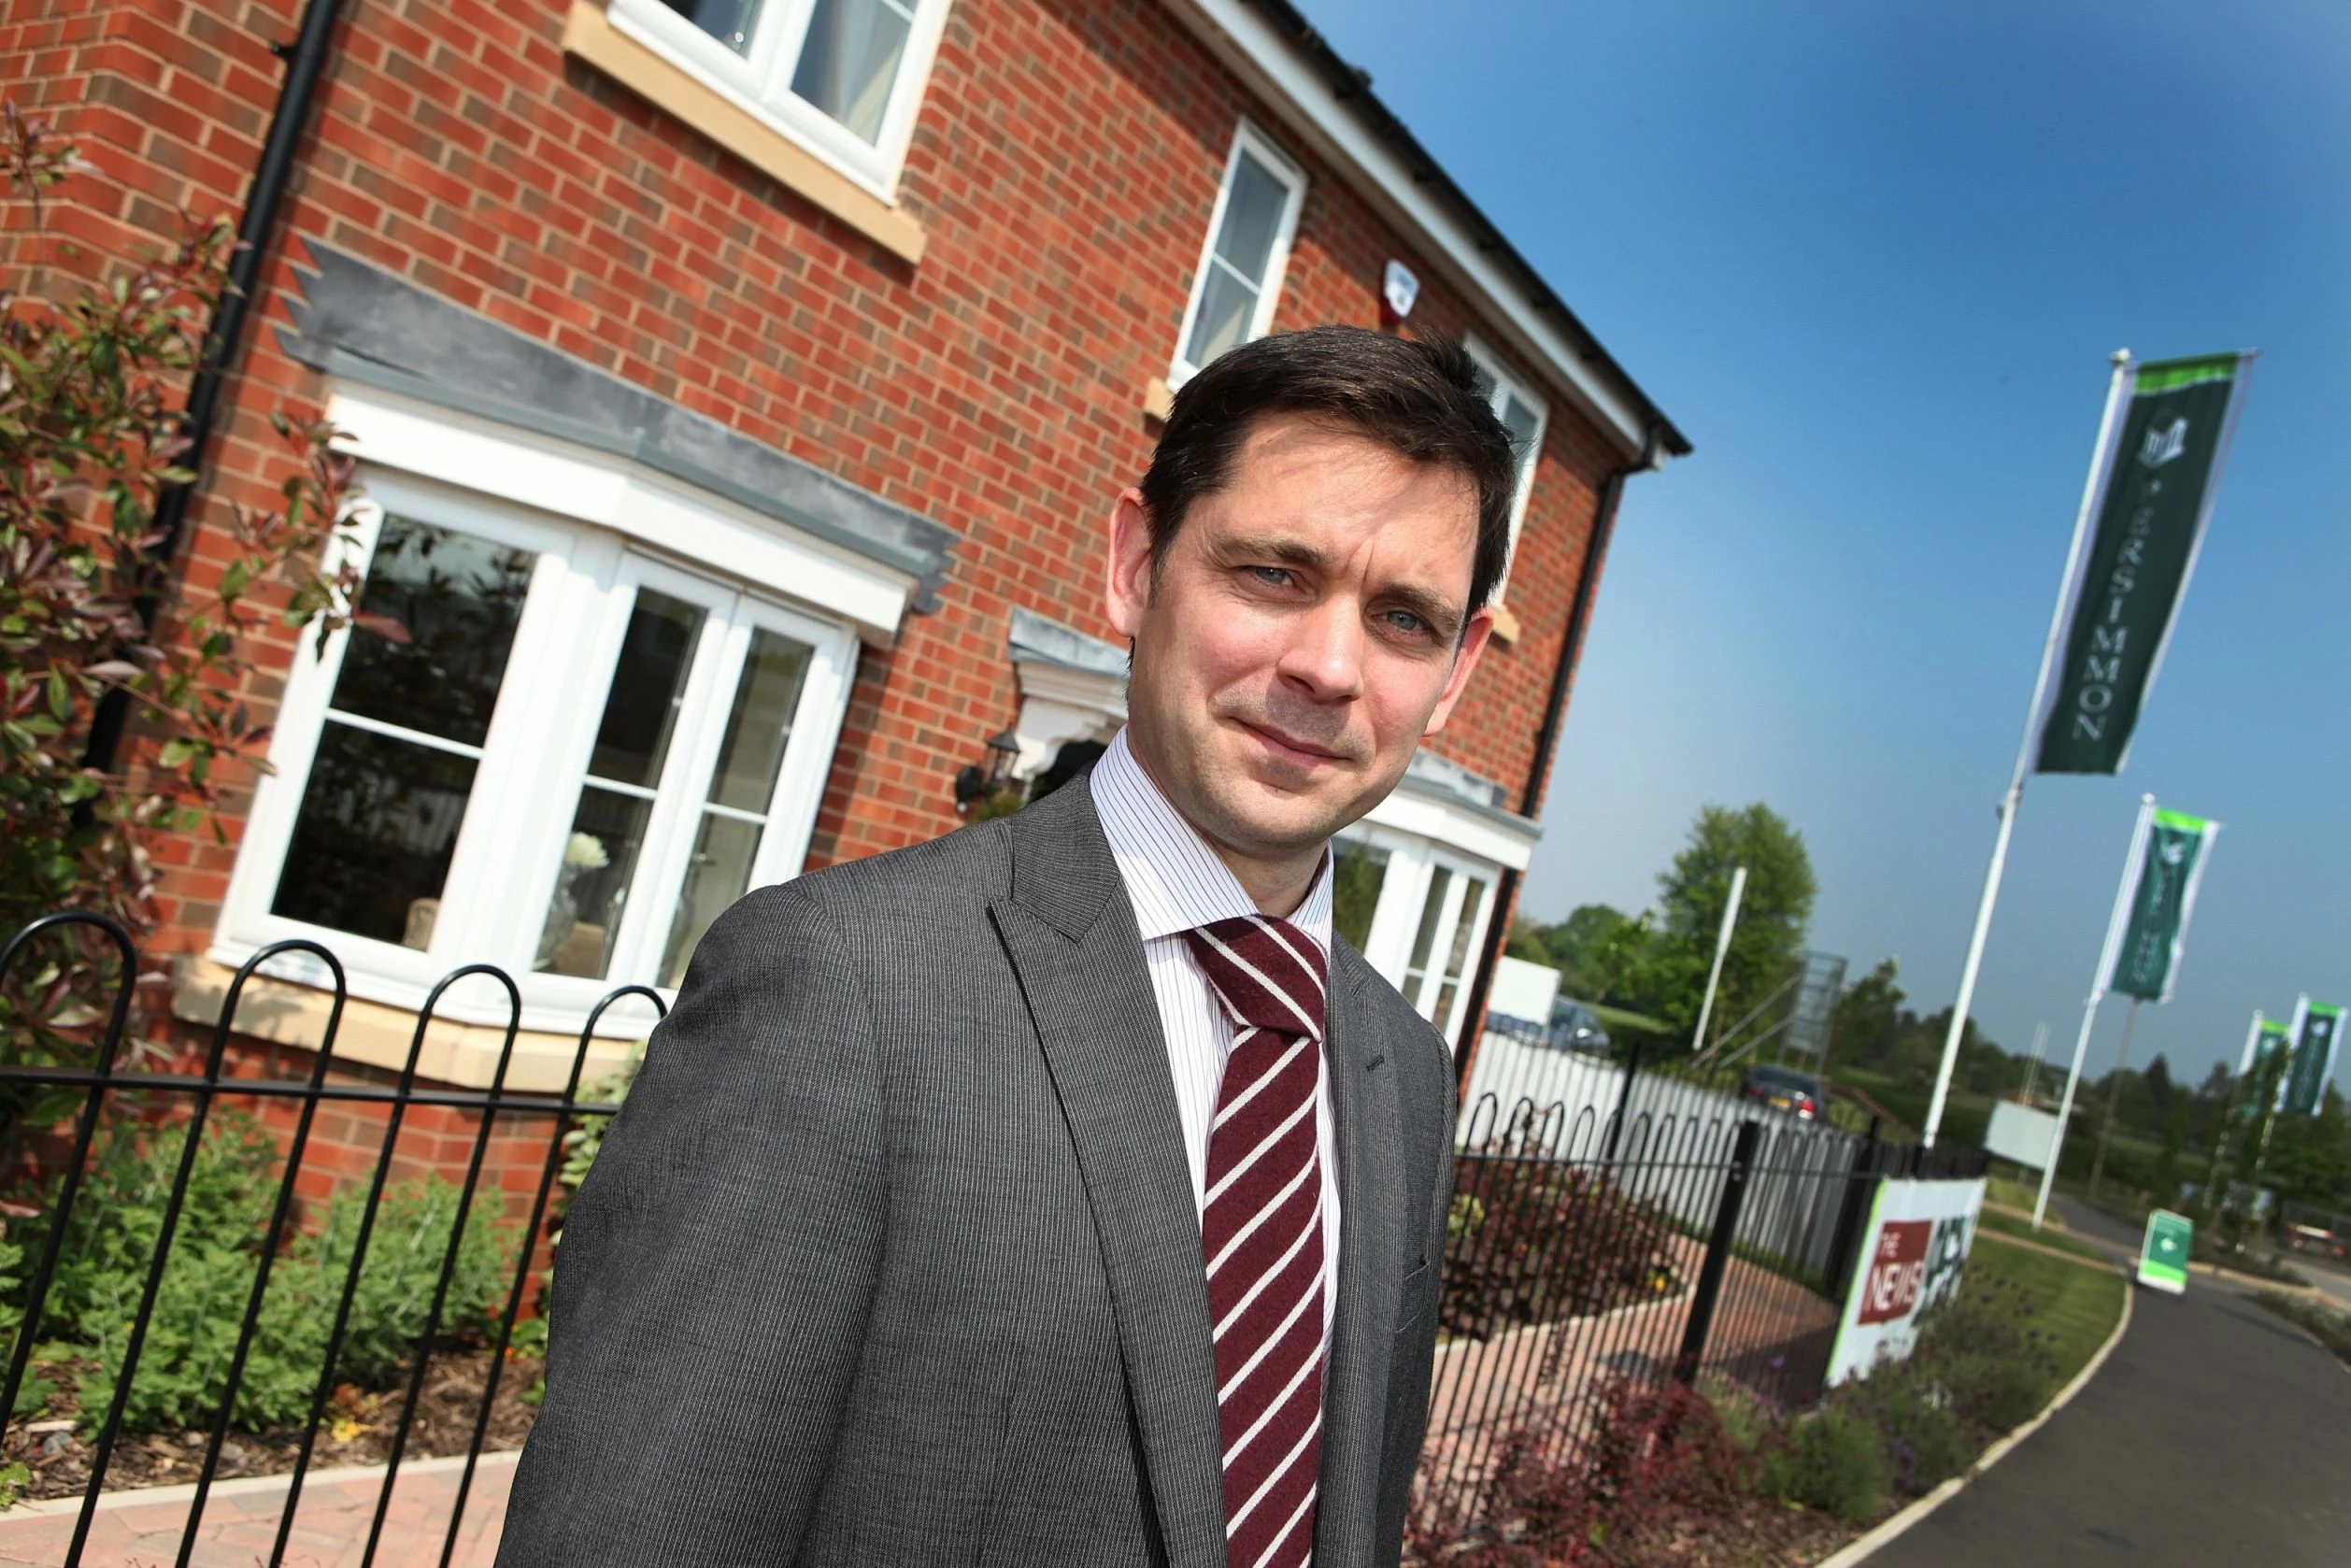 New homes planned for Wychbold 